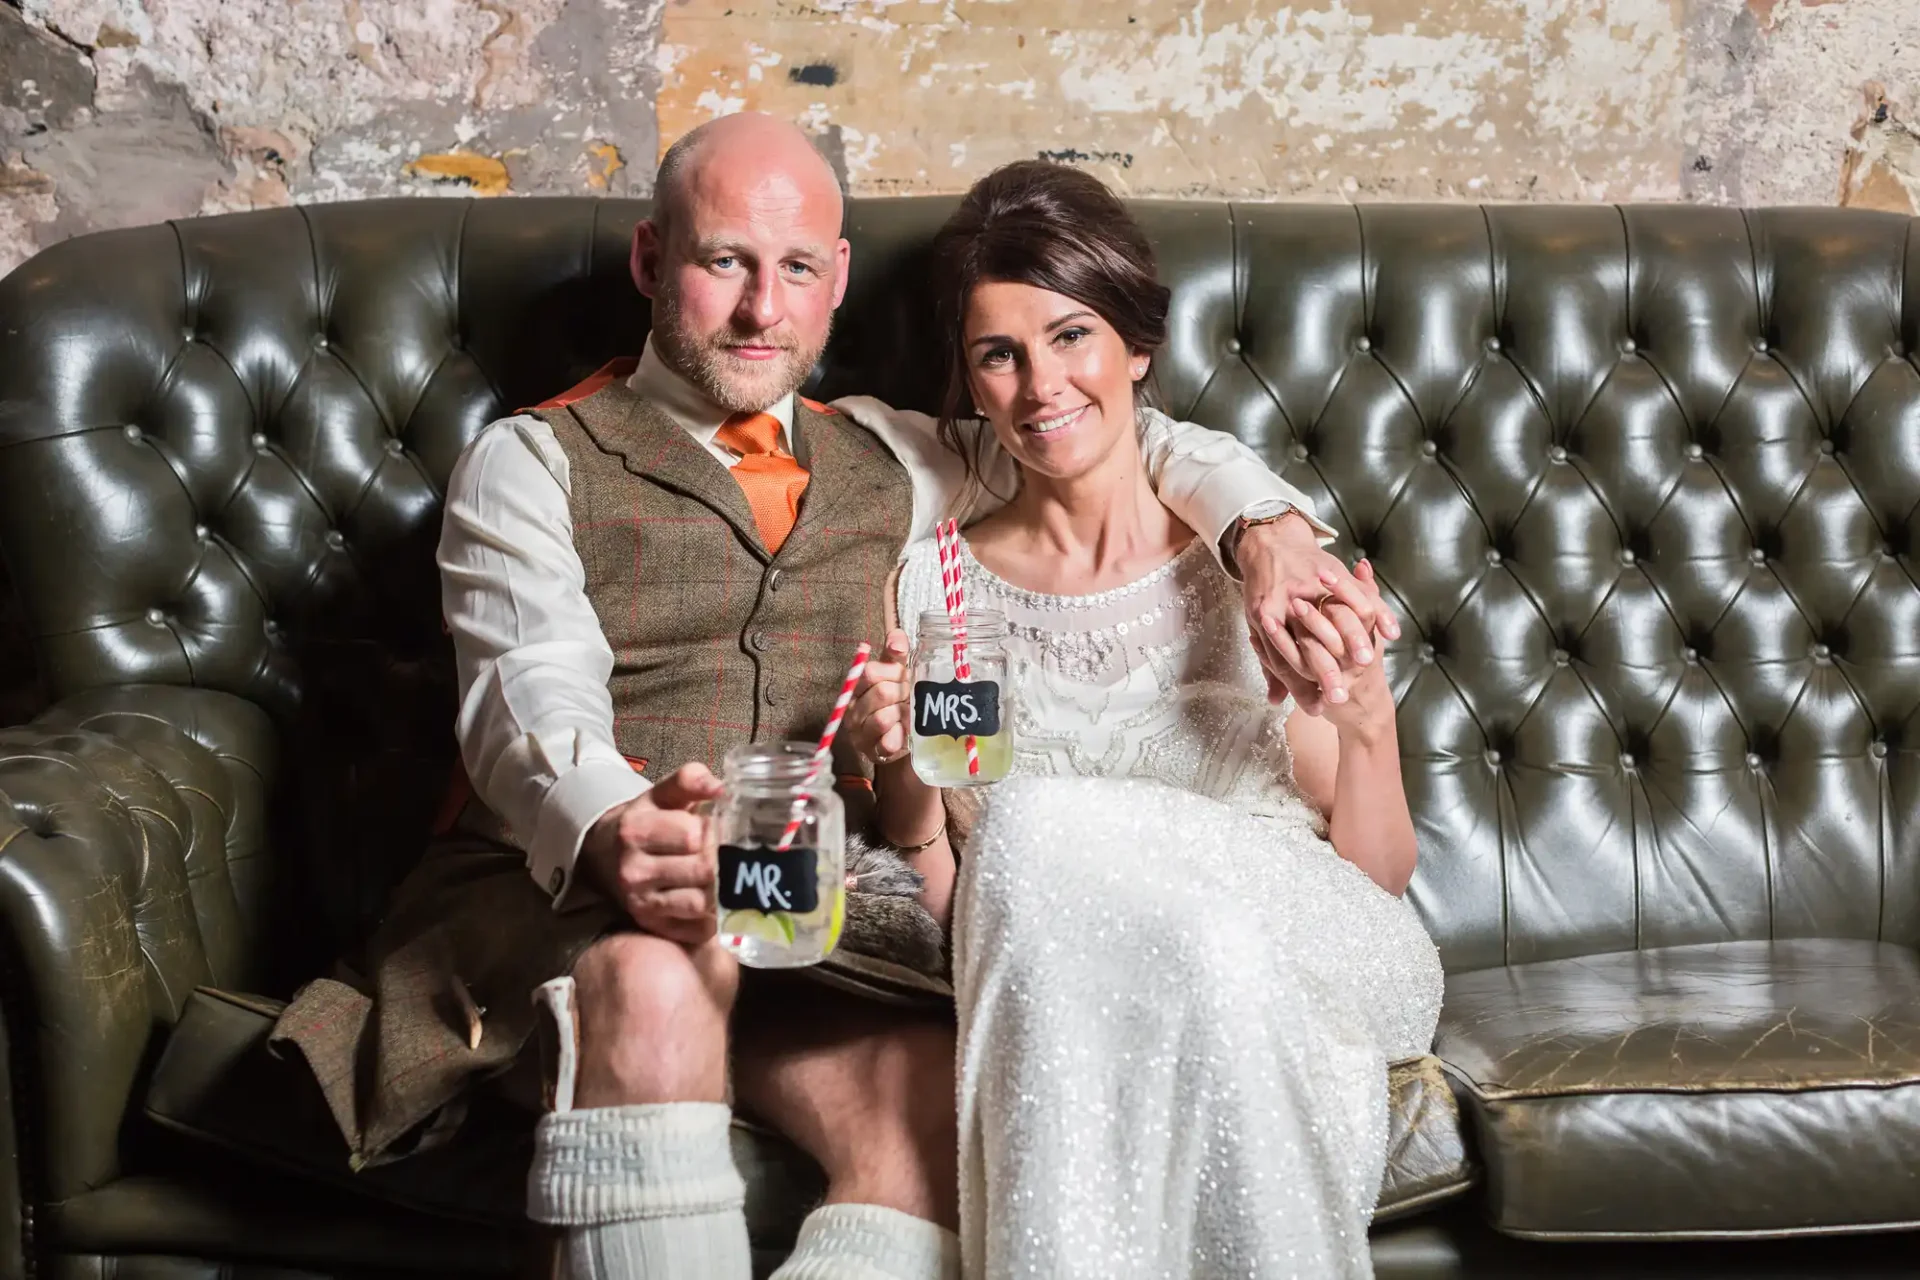 A couple in wedding attire sits on a leather sofa, smiling and holding mugs labelled "mr." and "mrs." in a rustic setting.